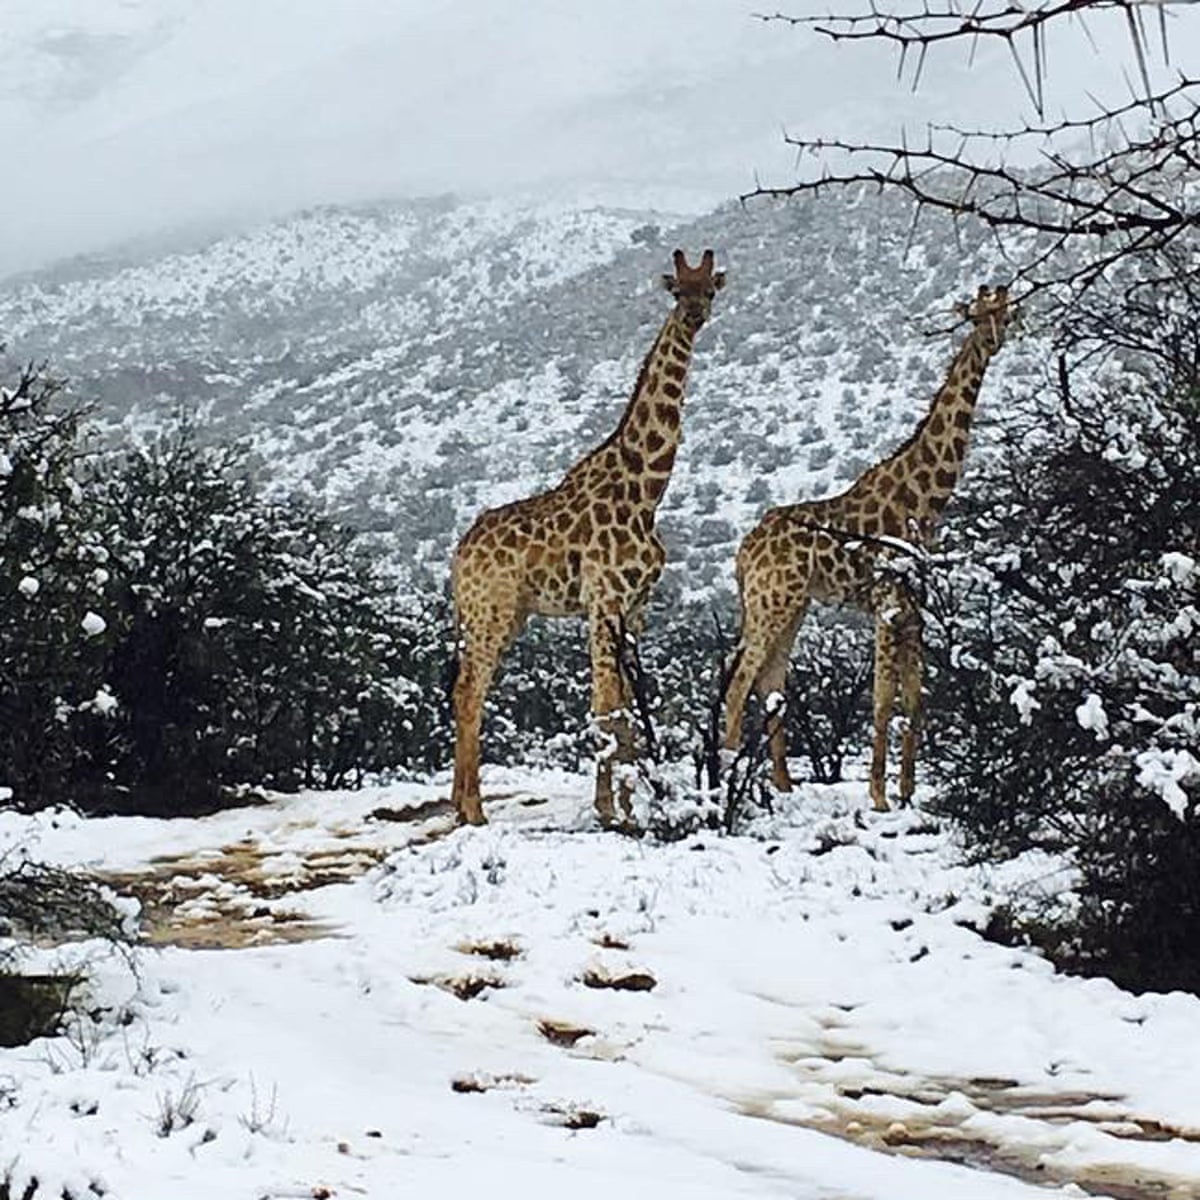 Spotted: giraffes in the snow | South Africa | The Guardian